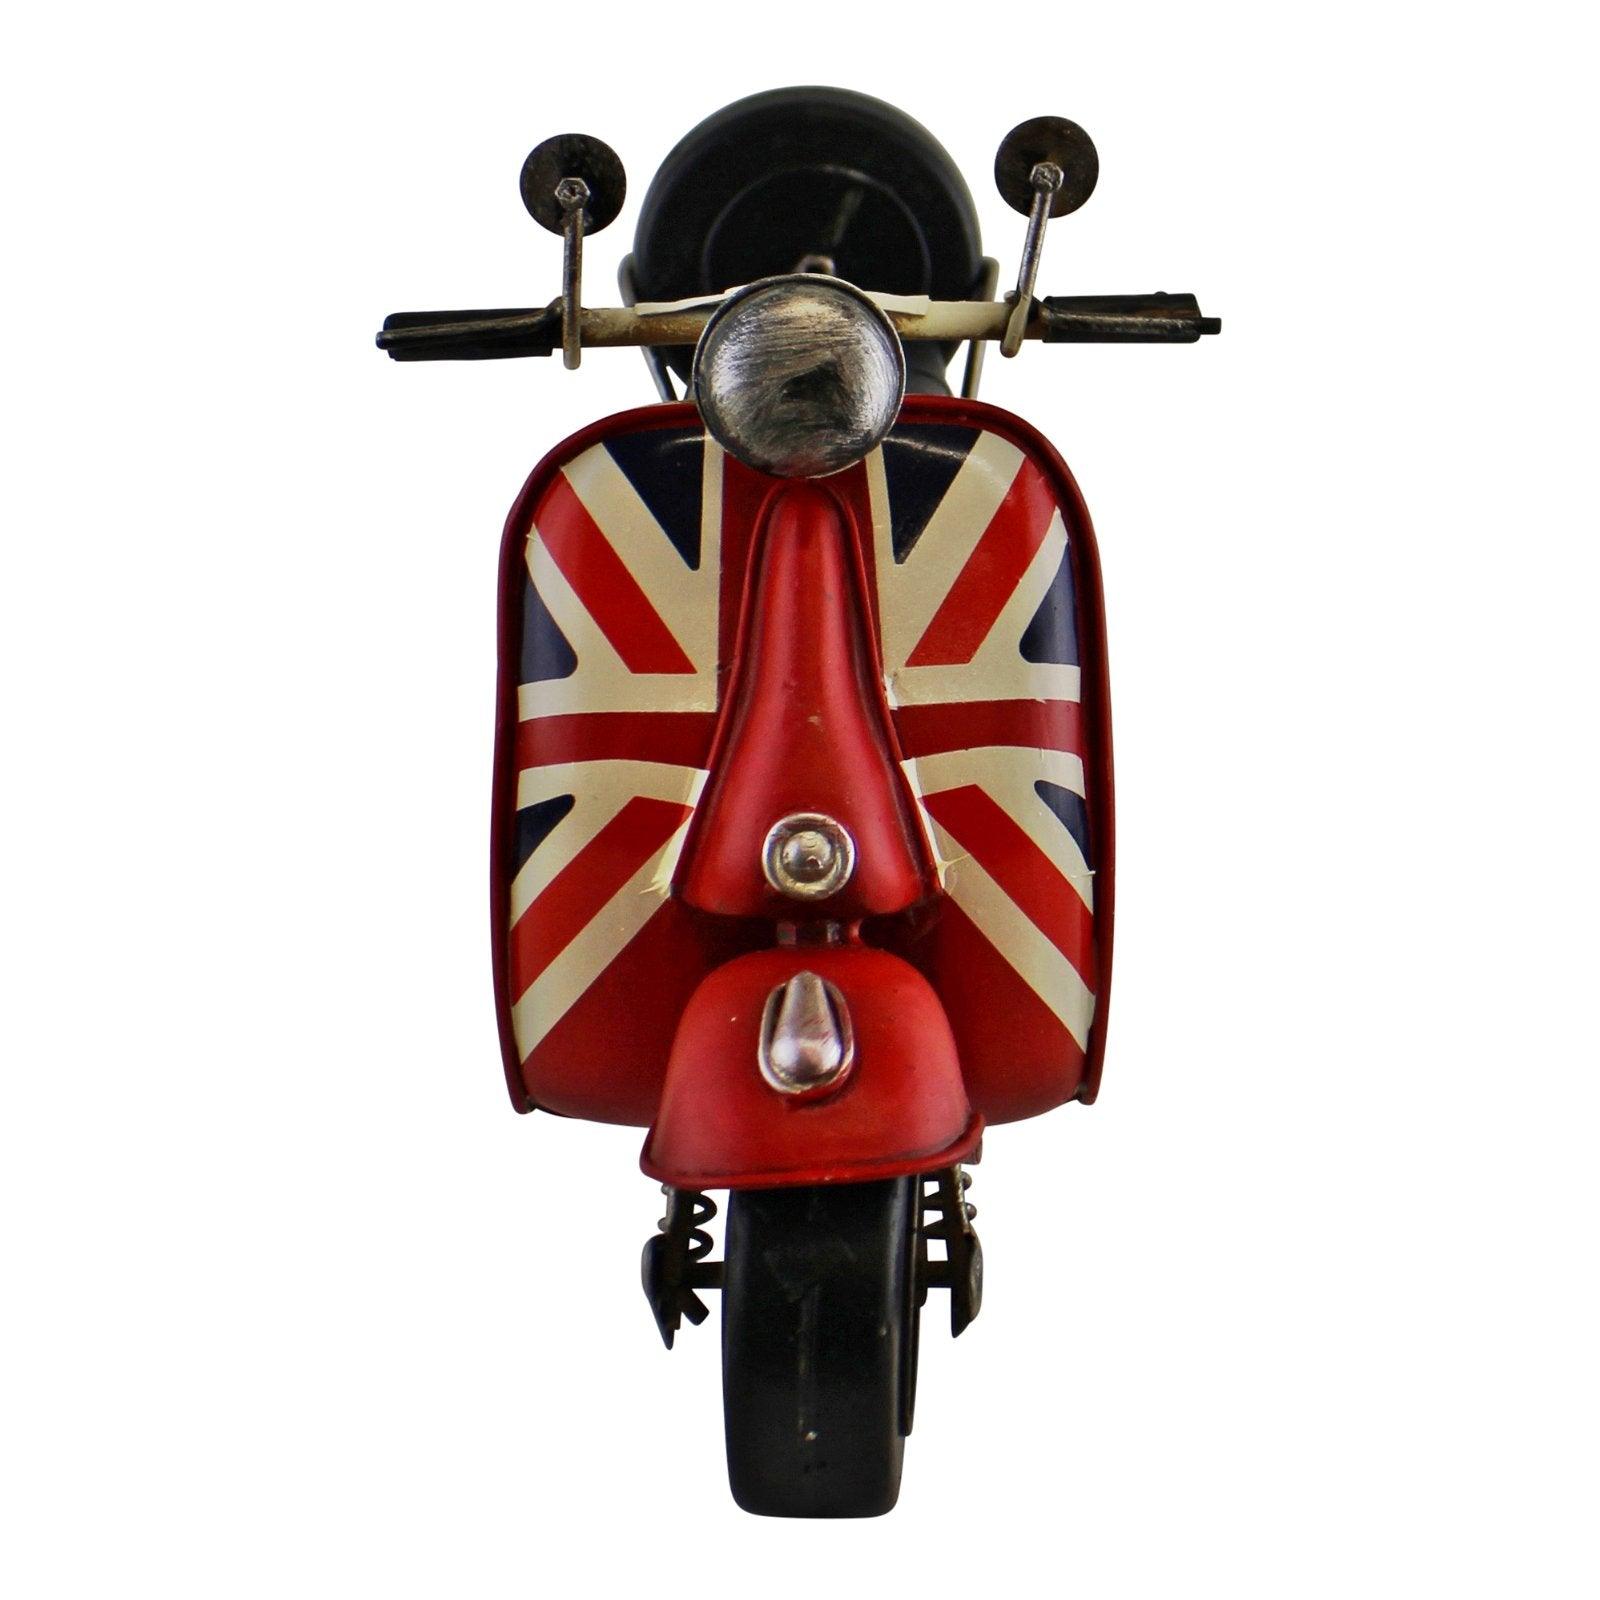 View Vintage Style Union Jack Scooter Ornament information